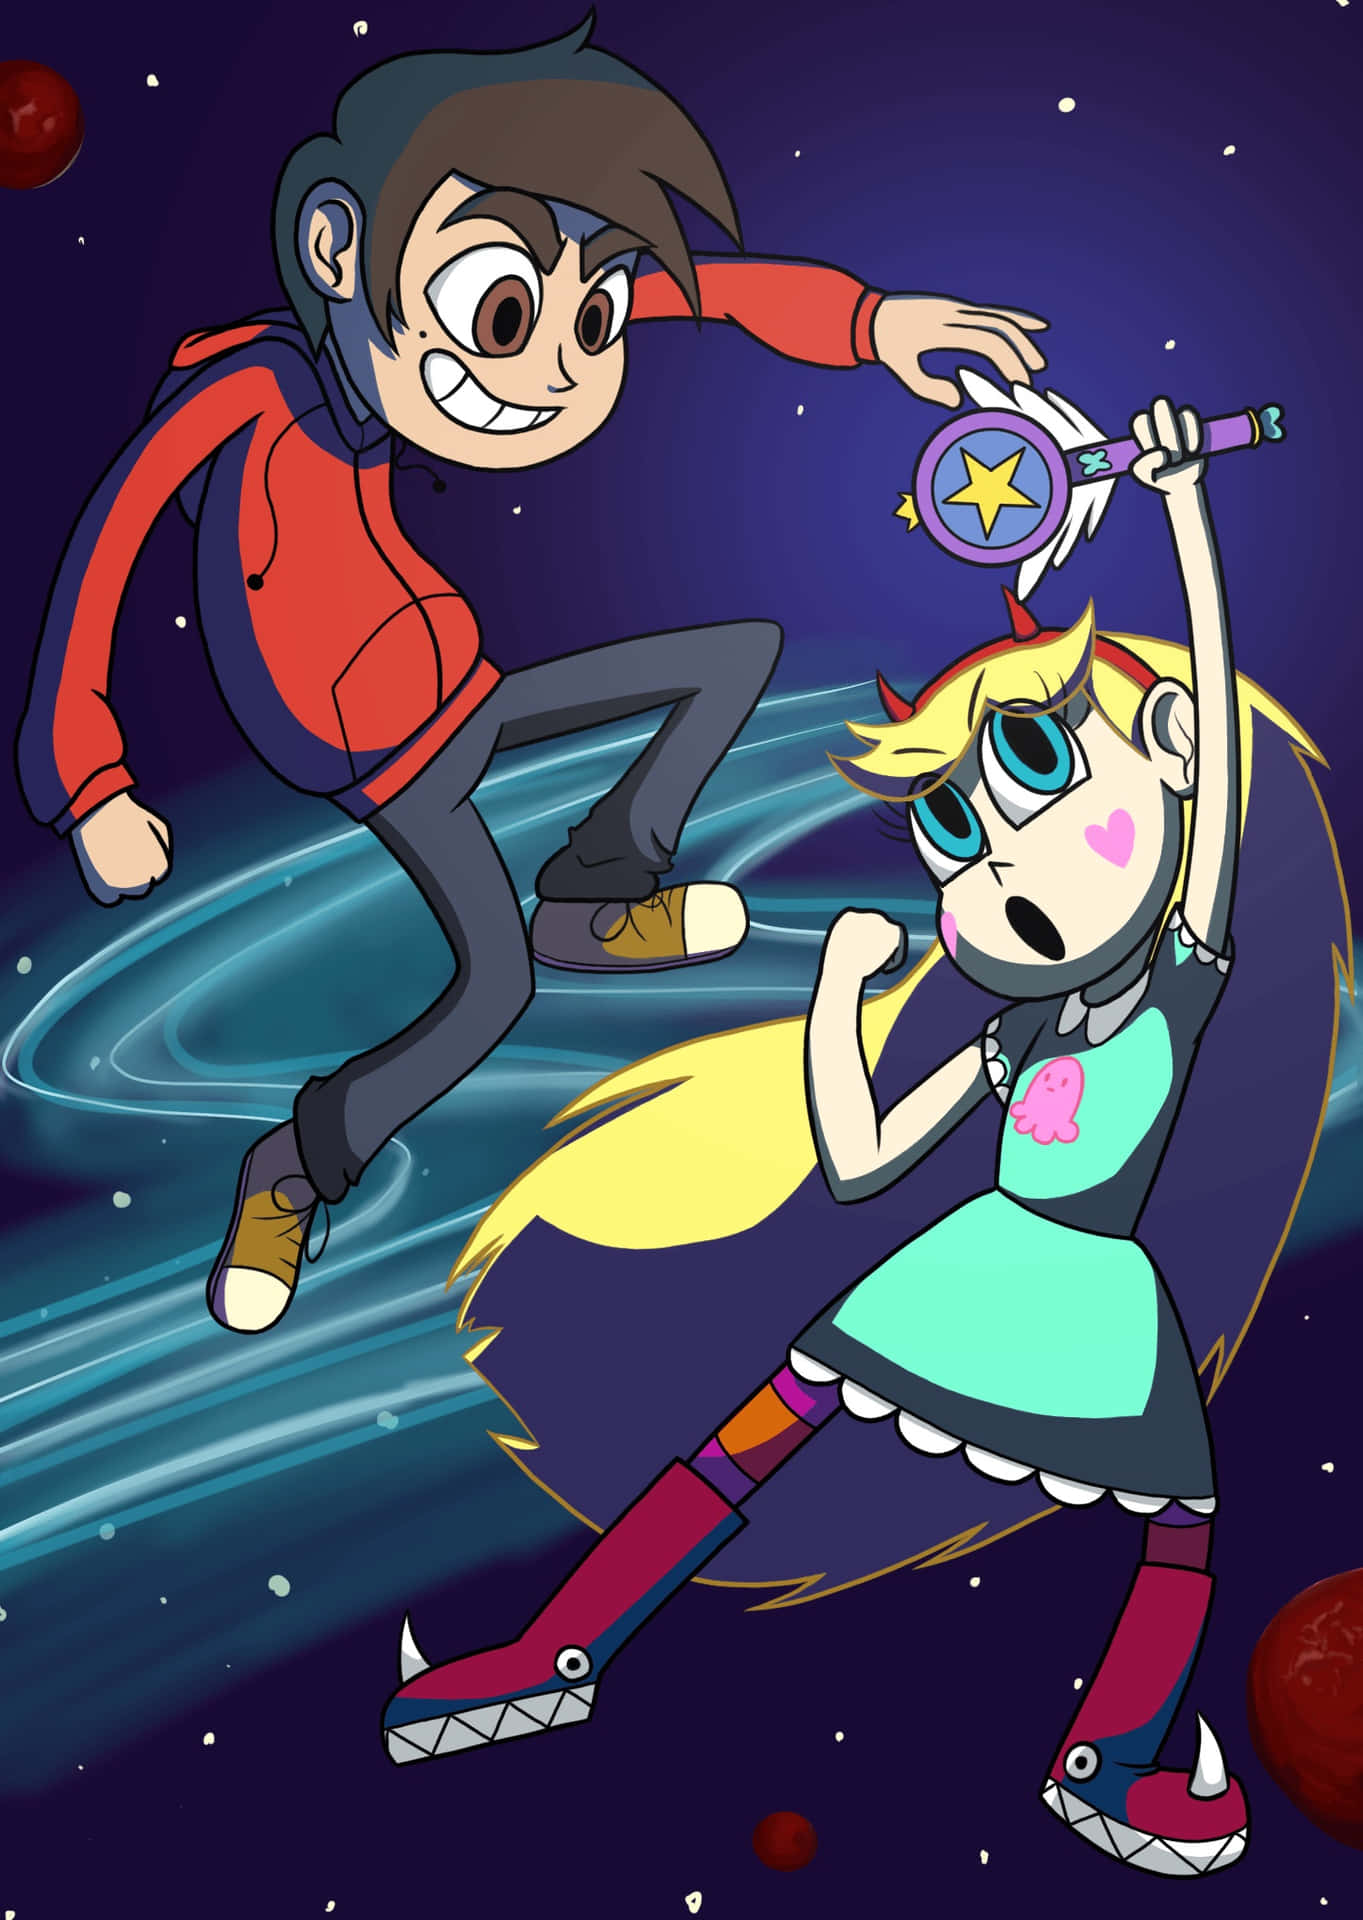 Star Butterfly and Marco Diaz from Star Vs. The Forces Of Evil in a colorful and magical background.